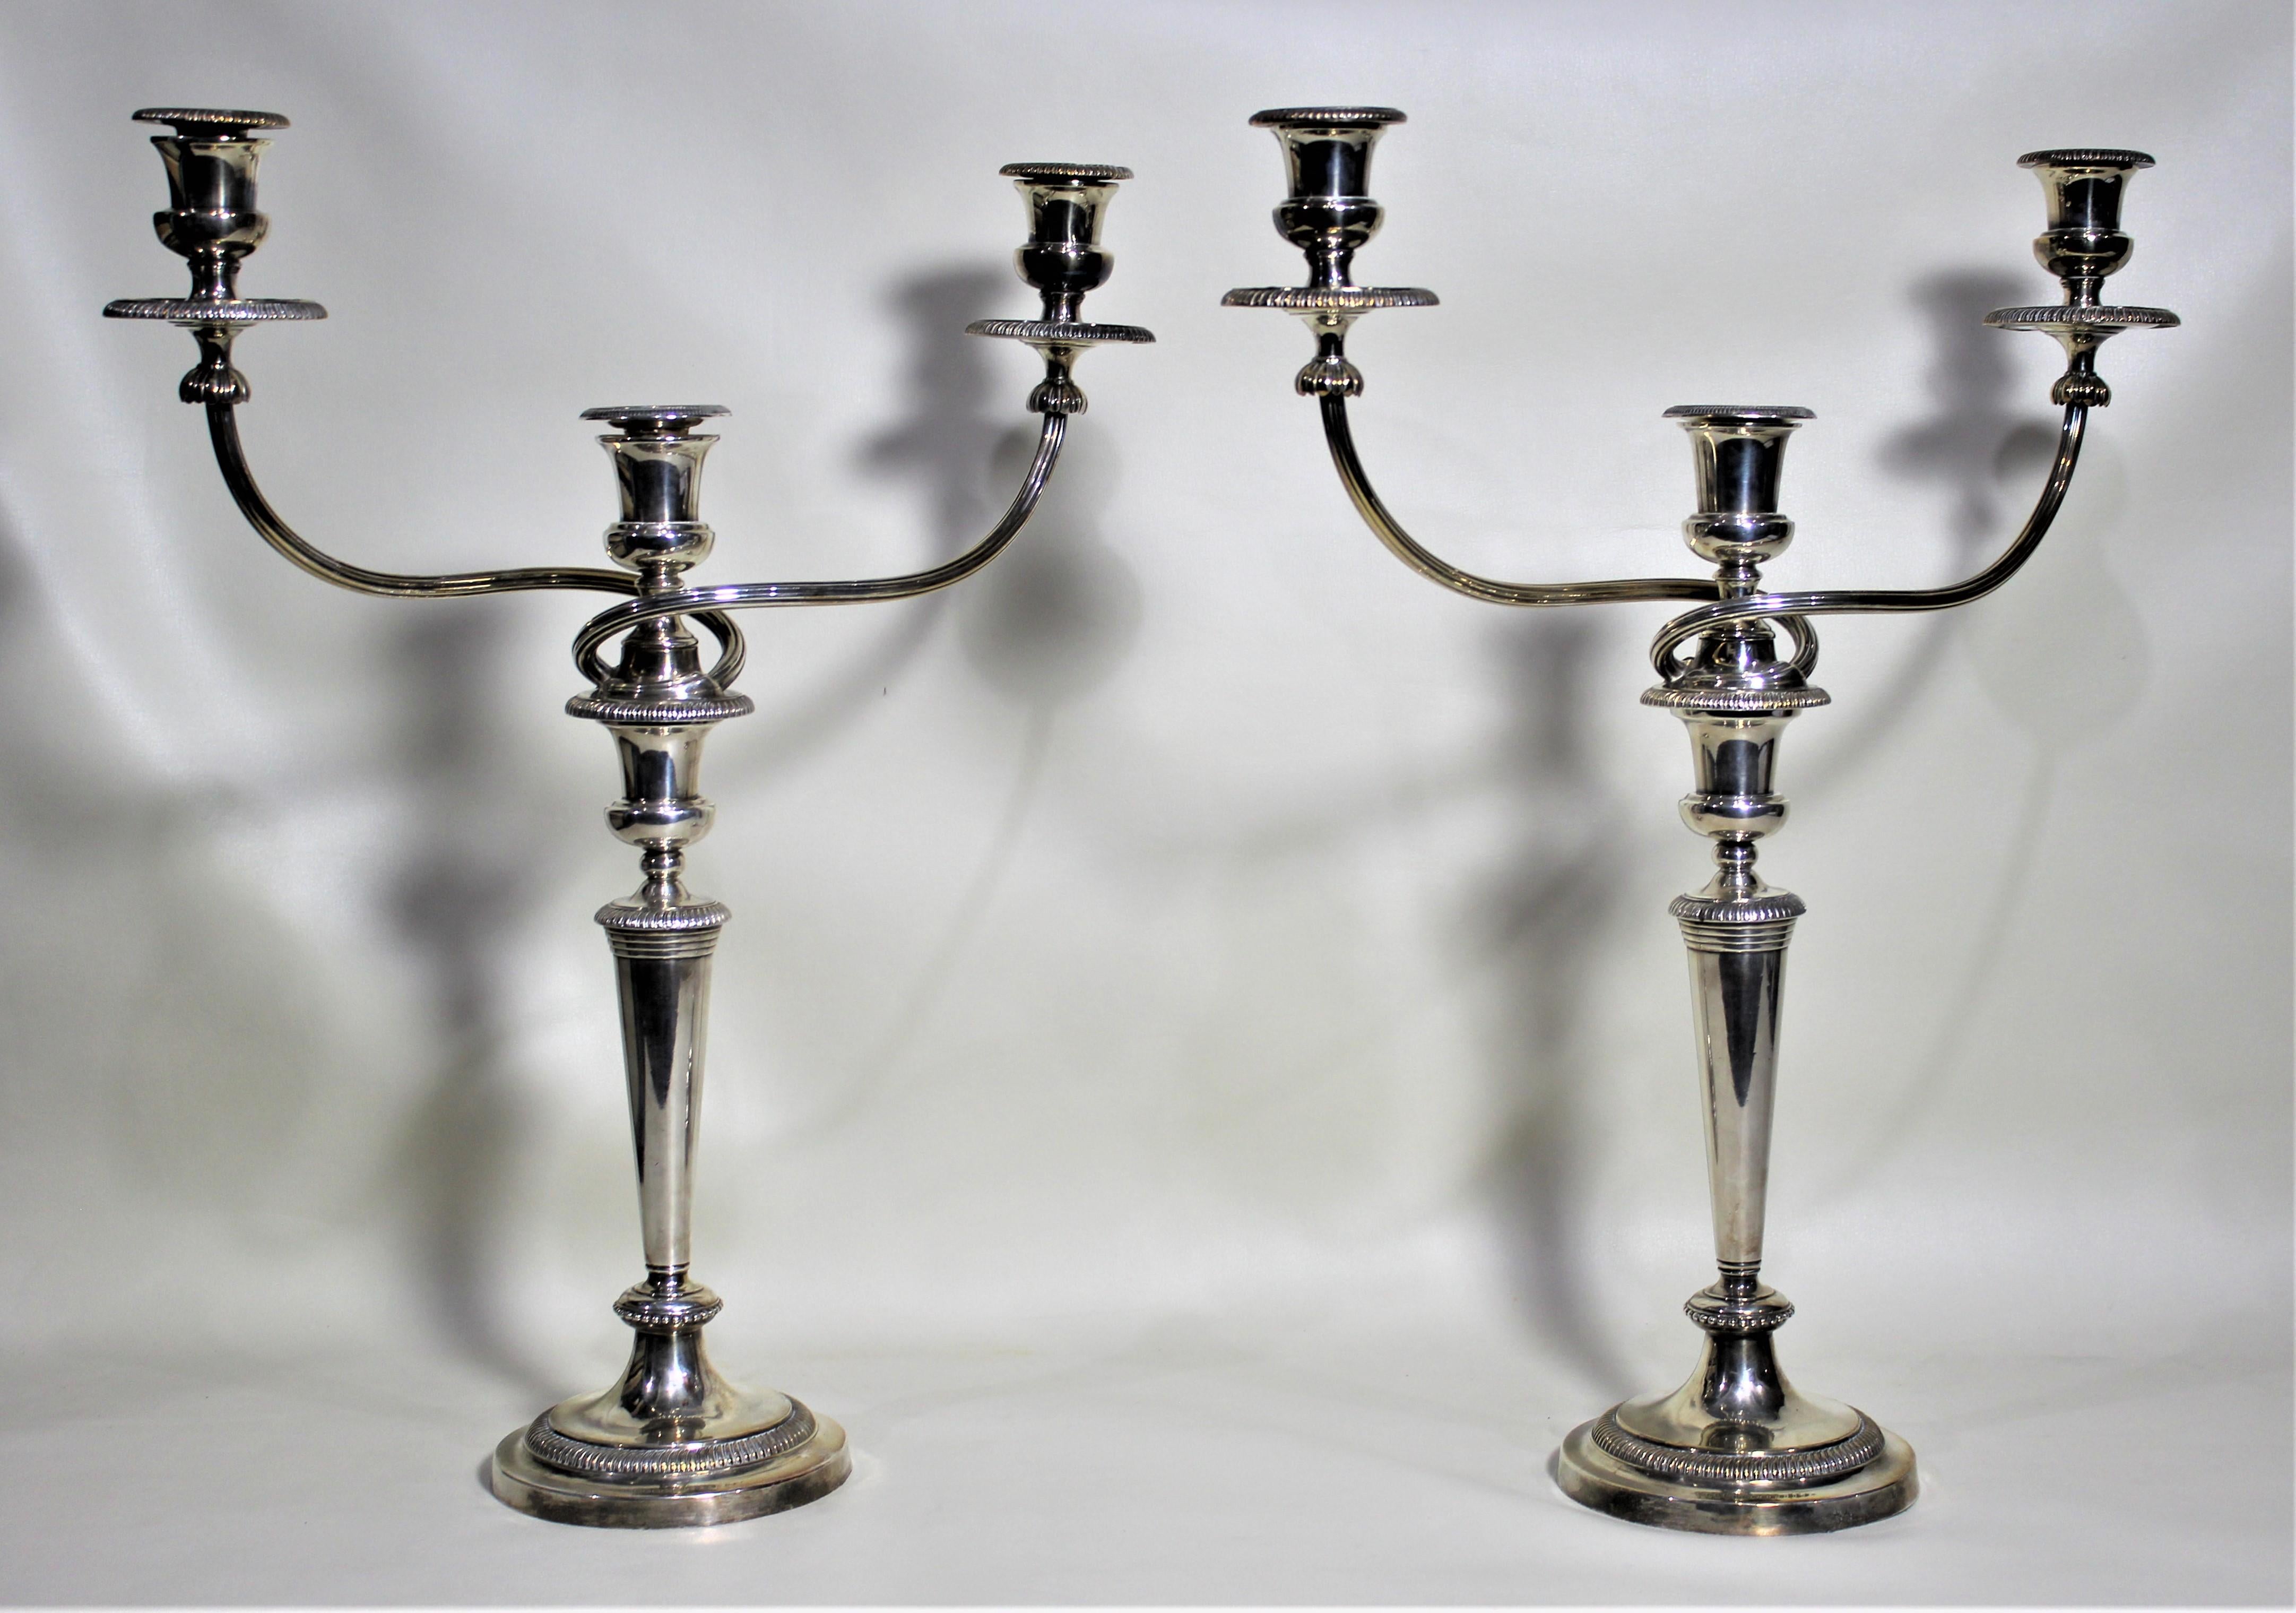 English Mathew Bolton Antique Sheffield Silver Plated 3 Branch Convertible Candelabras For Sale